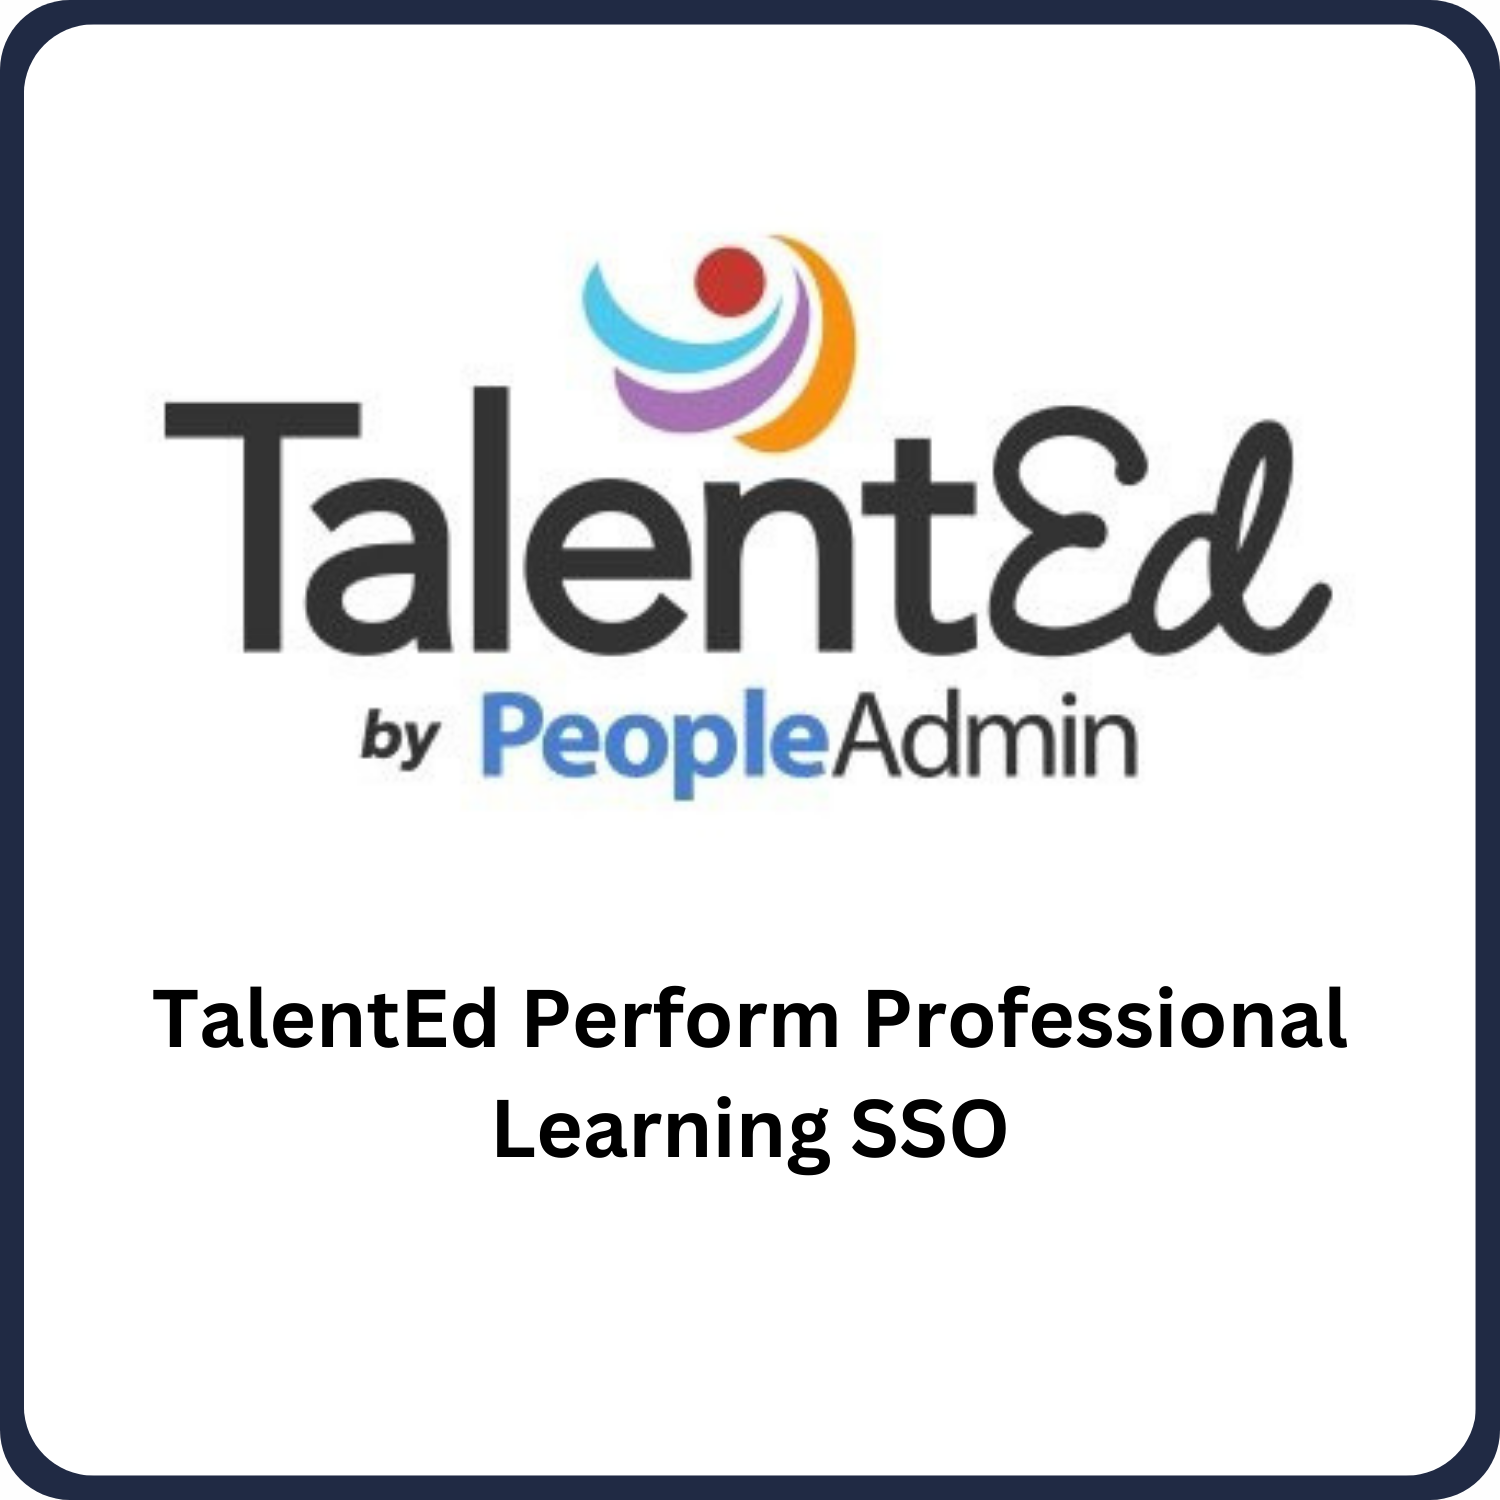 TalentEd Perform Professional Learning SSO